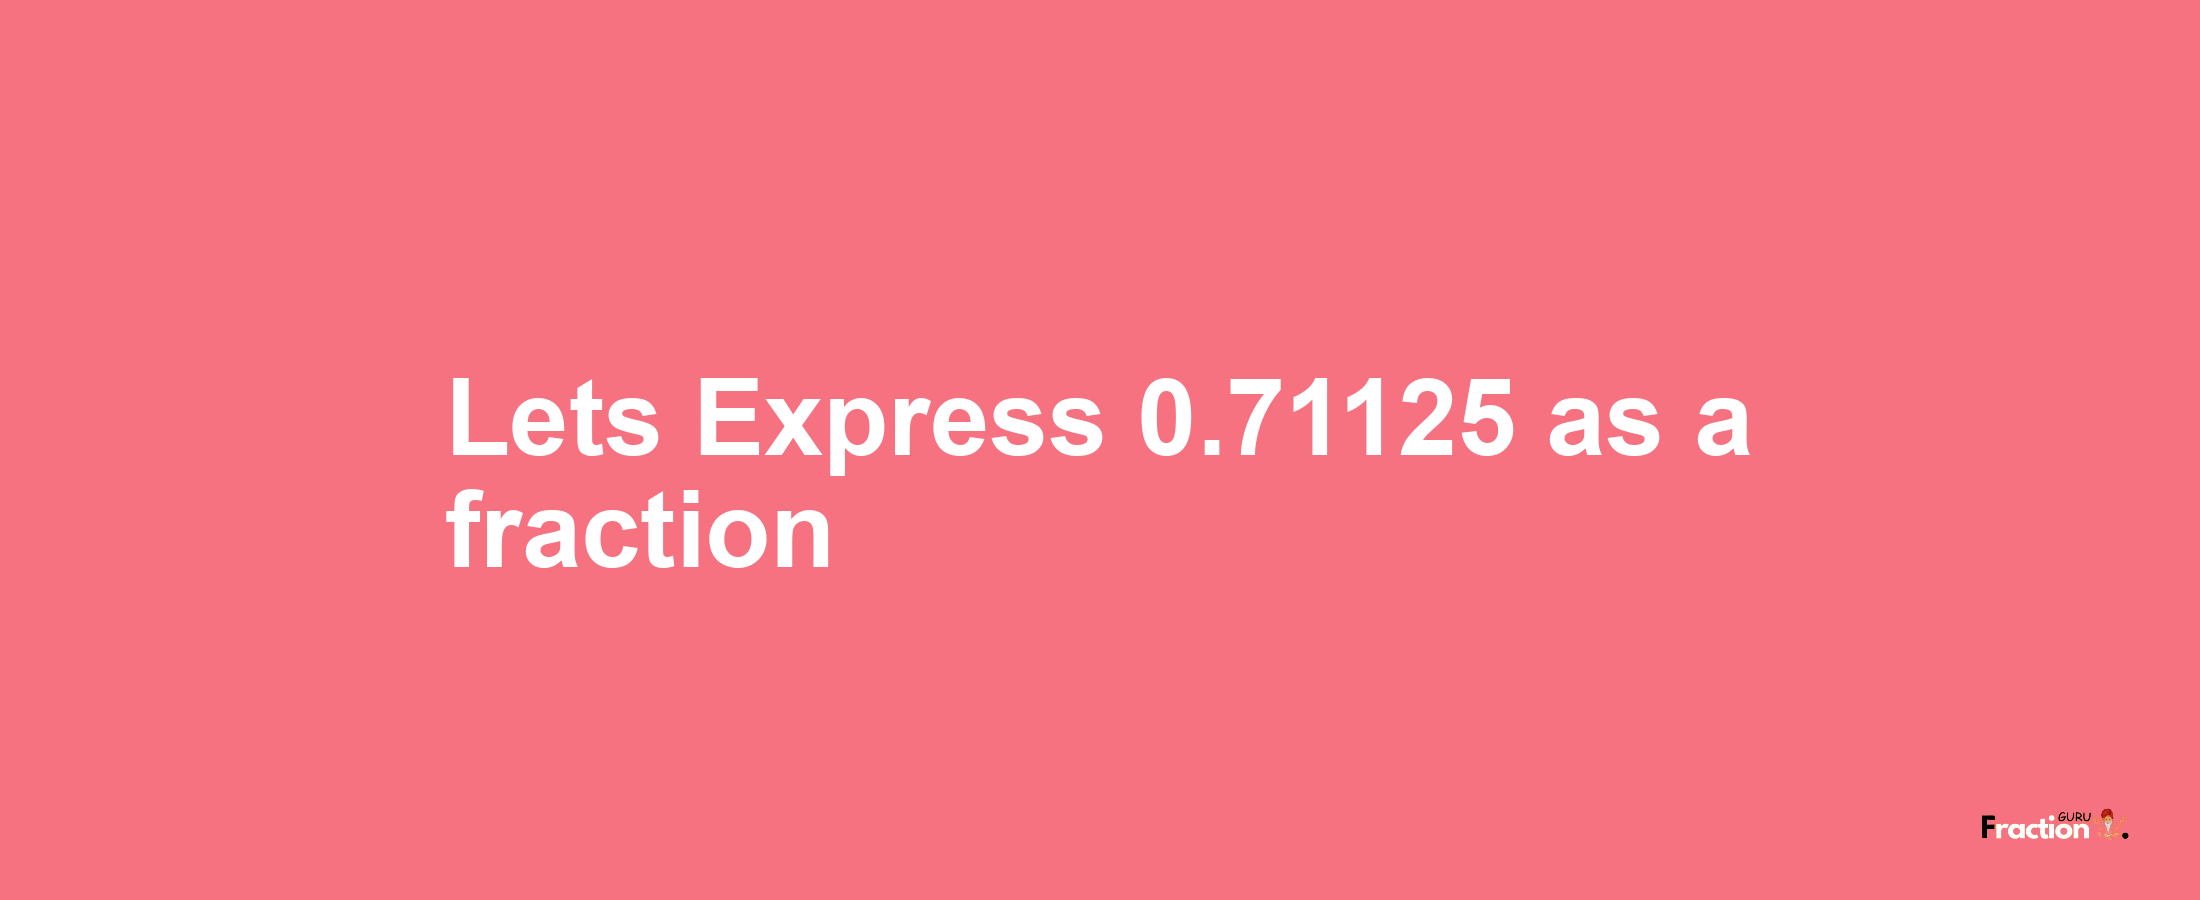 Lets Express 0.71125 as afraction